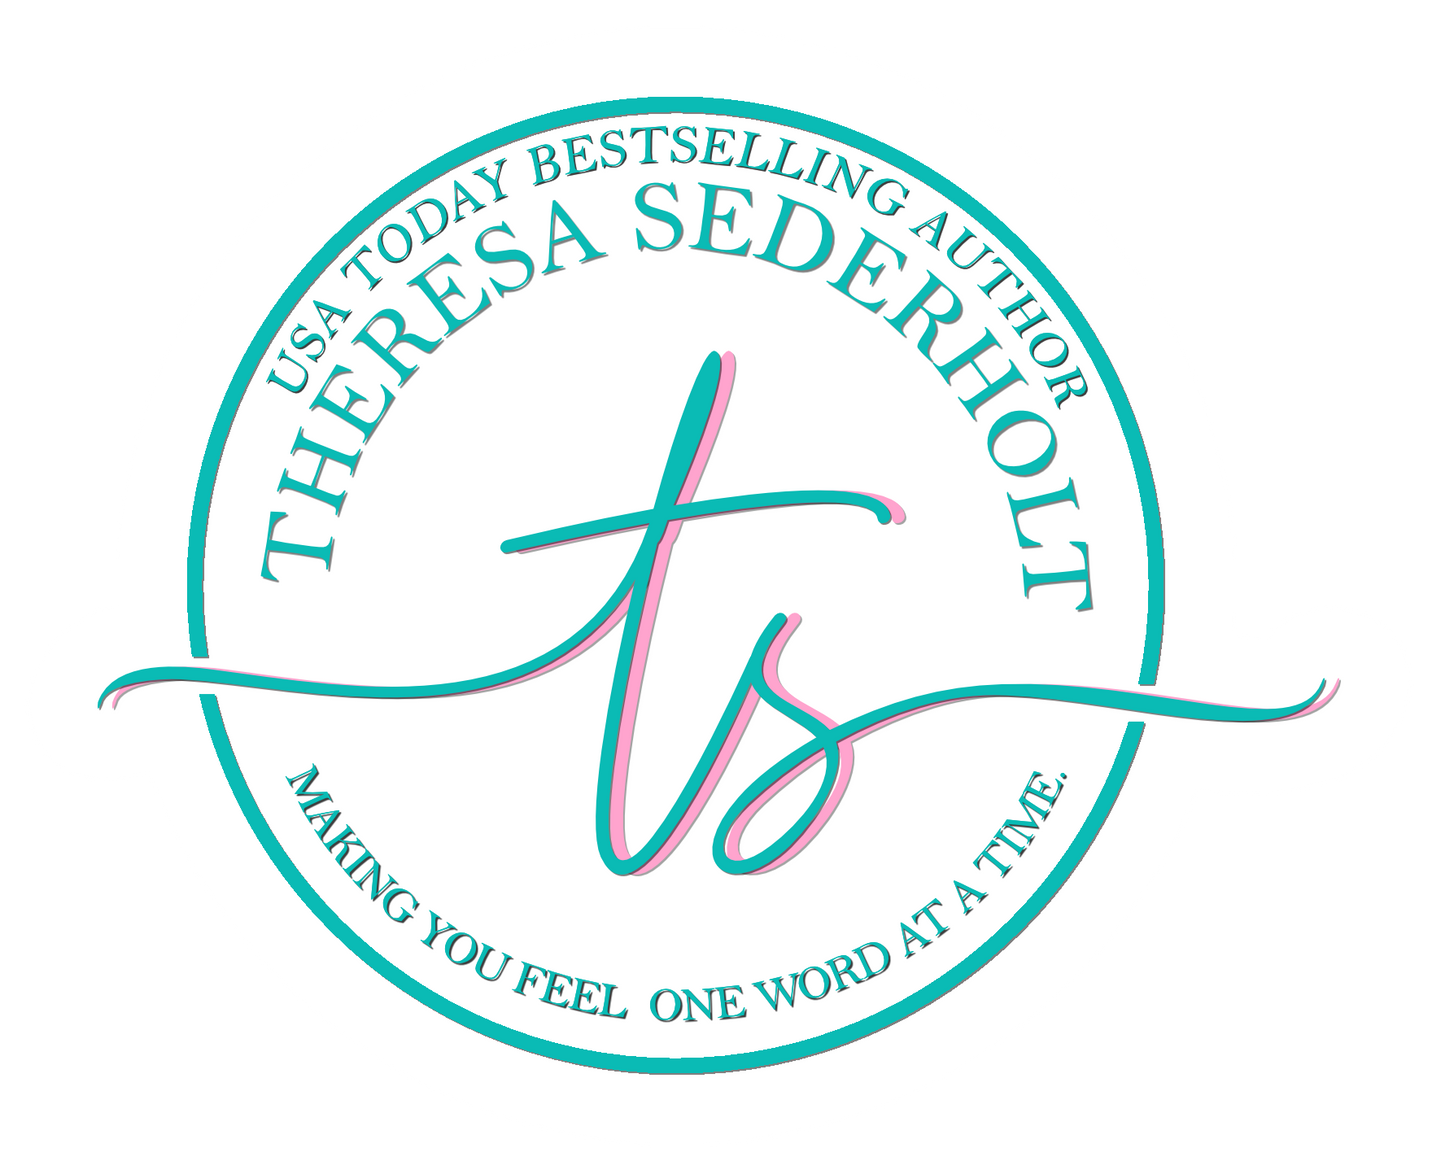 Theresa Sederholt Collection